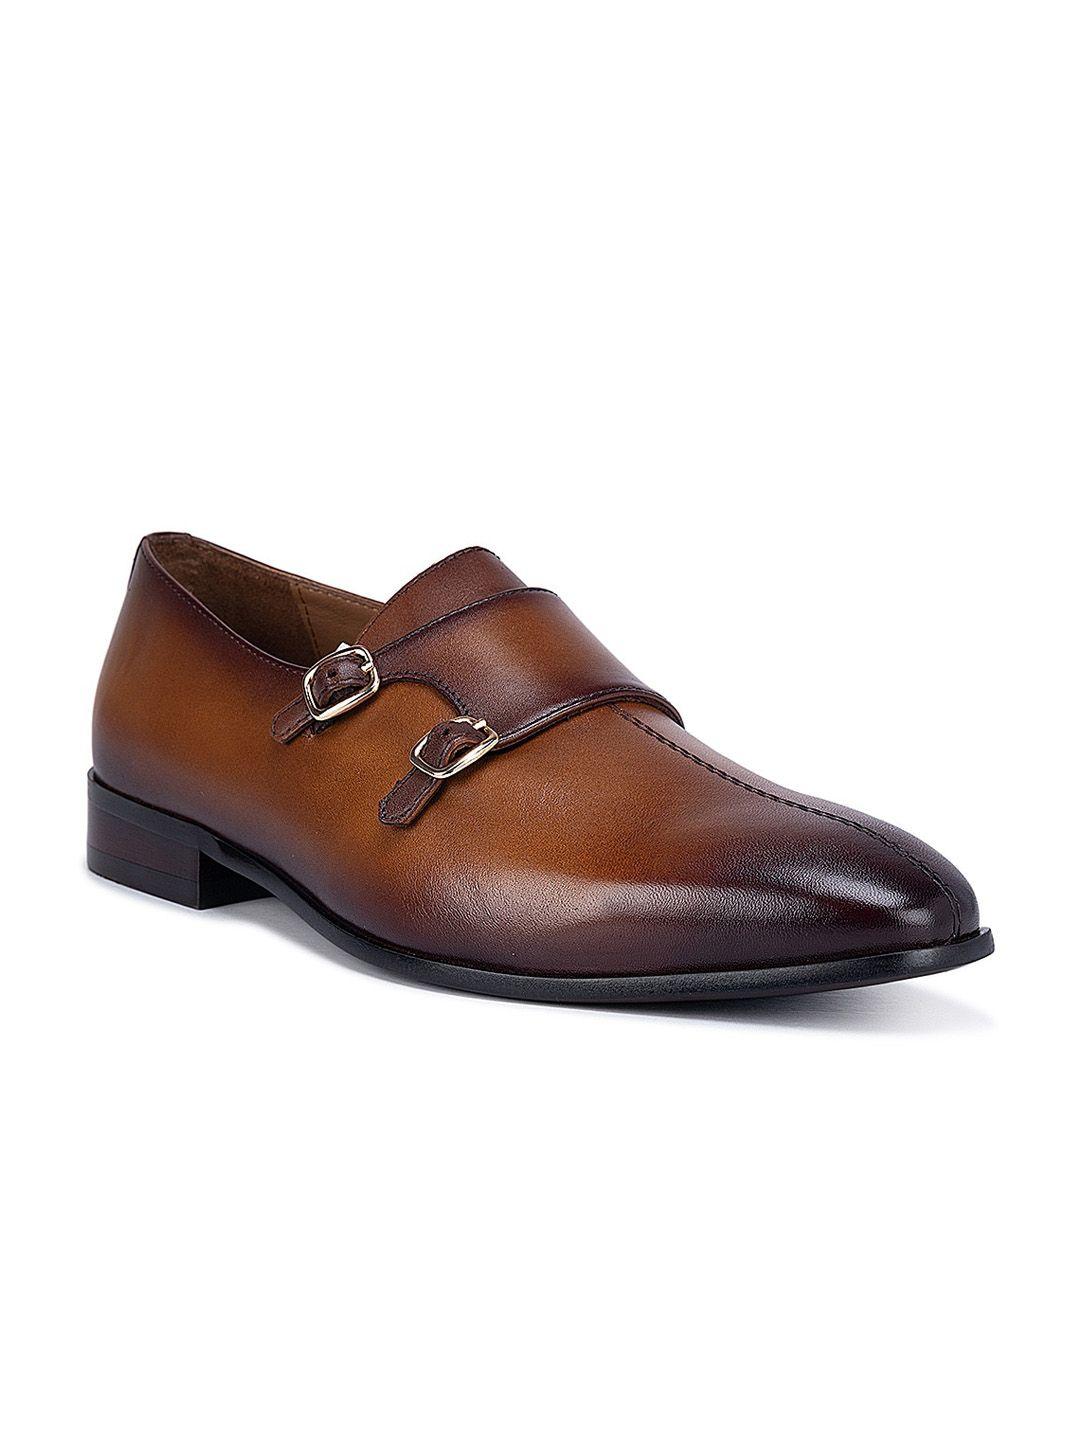 rosso-brunello-men-textured-pointed-toe-leather-slip-on-formal-shoes